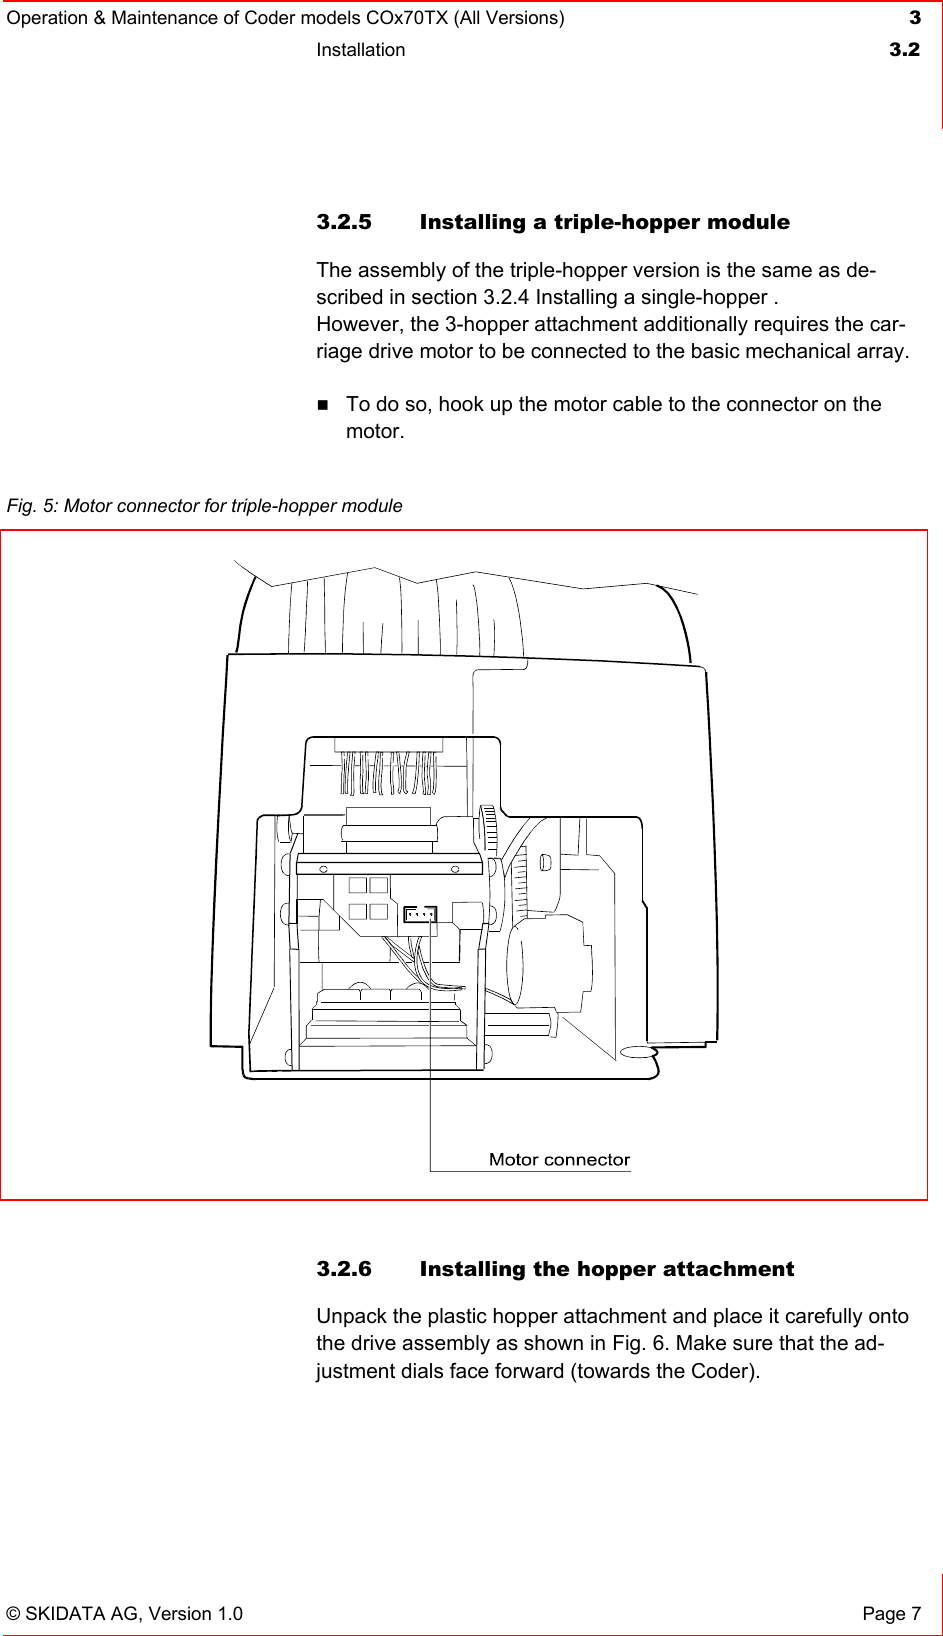 Operation &amp; Maintenance of Coder models COx70TX (All Versions) 3 Installation  3.2   © SKIDATA AG, Version 1.0  Page 7 3.2.5 Installing a triple-hopper module The assembly of the triple-hopper version is the same as de-scribed in section 3.2.4 Installing a single-hopper .  However, the 3-hopper attachment additionally requires the car-riage drive motor to be connected to the basic mechanical array.    To do so, hook up the motor cable to the connector on the motor.   3.2.6  Installing the hopper attachment Unpack the plastic hopper attachment and place it carefully onto the drive assembly as shown in Fig. 6. Make sure that the ad-justment dials face forward (towards the Coder).  Fig. 5: Motor connector for triple-hopper module   